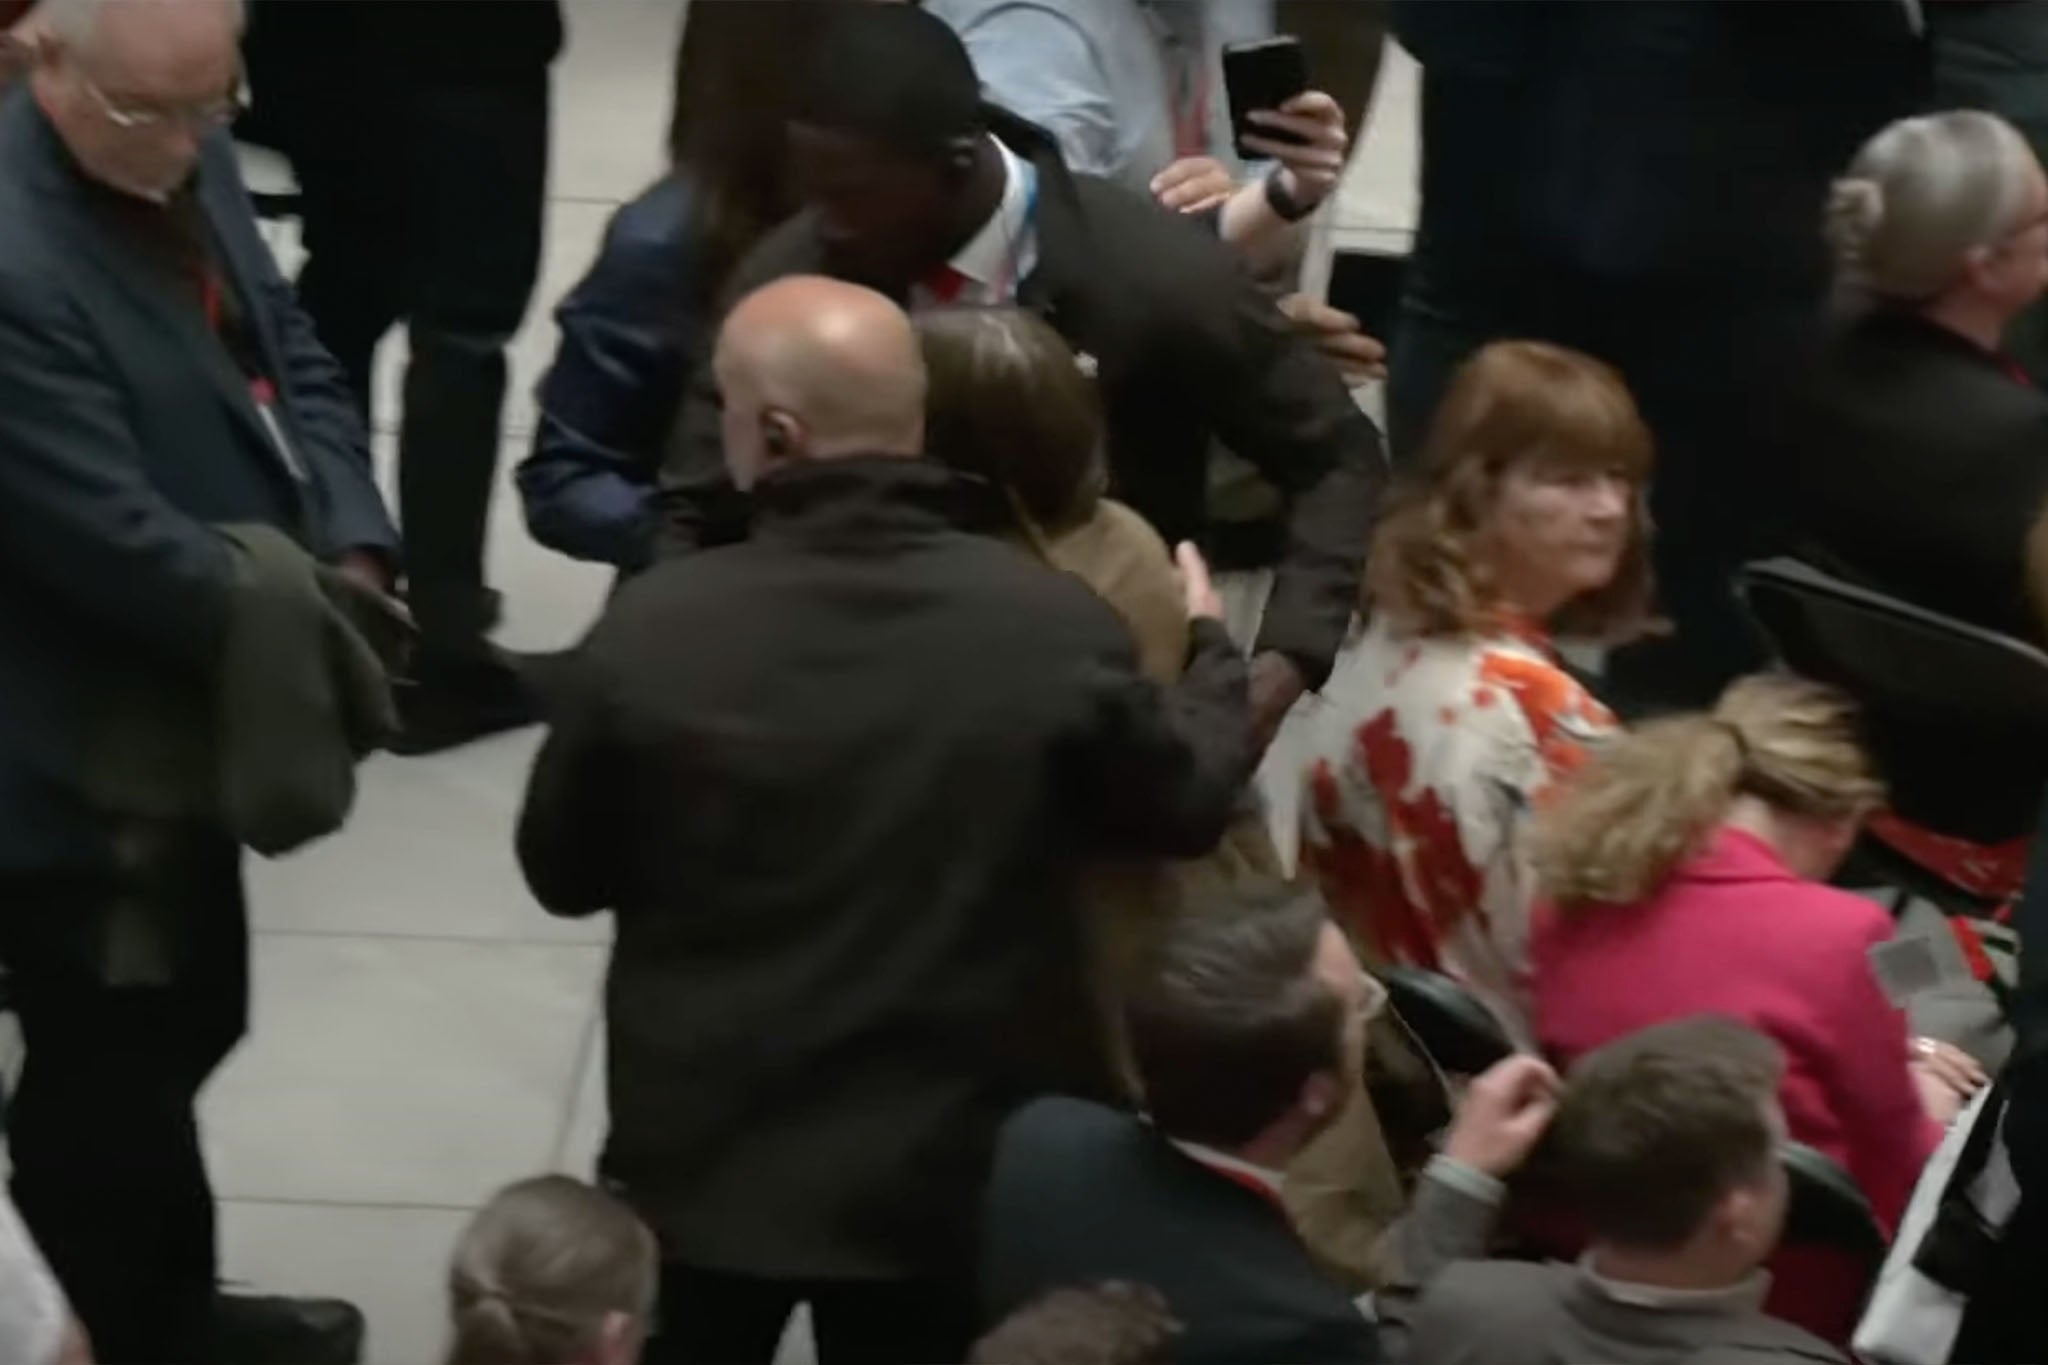 The protester being removed from the launch event in Greater Manchester on Thursday